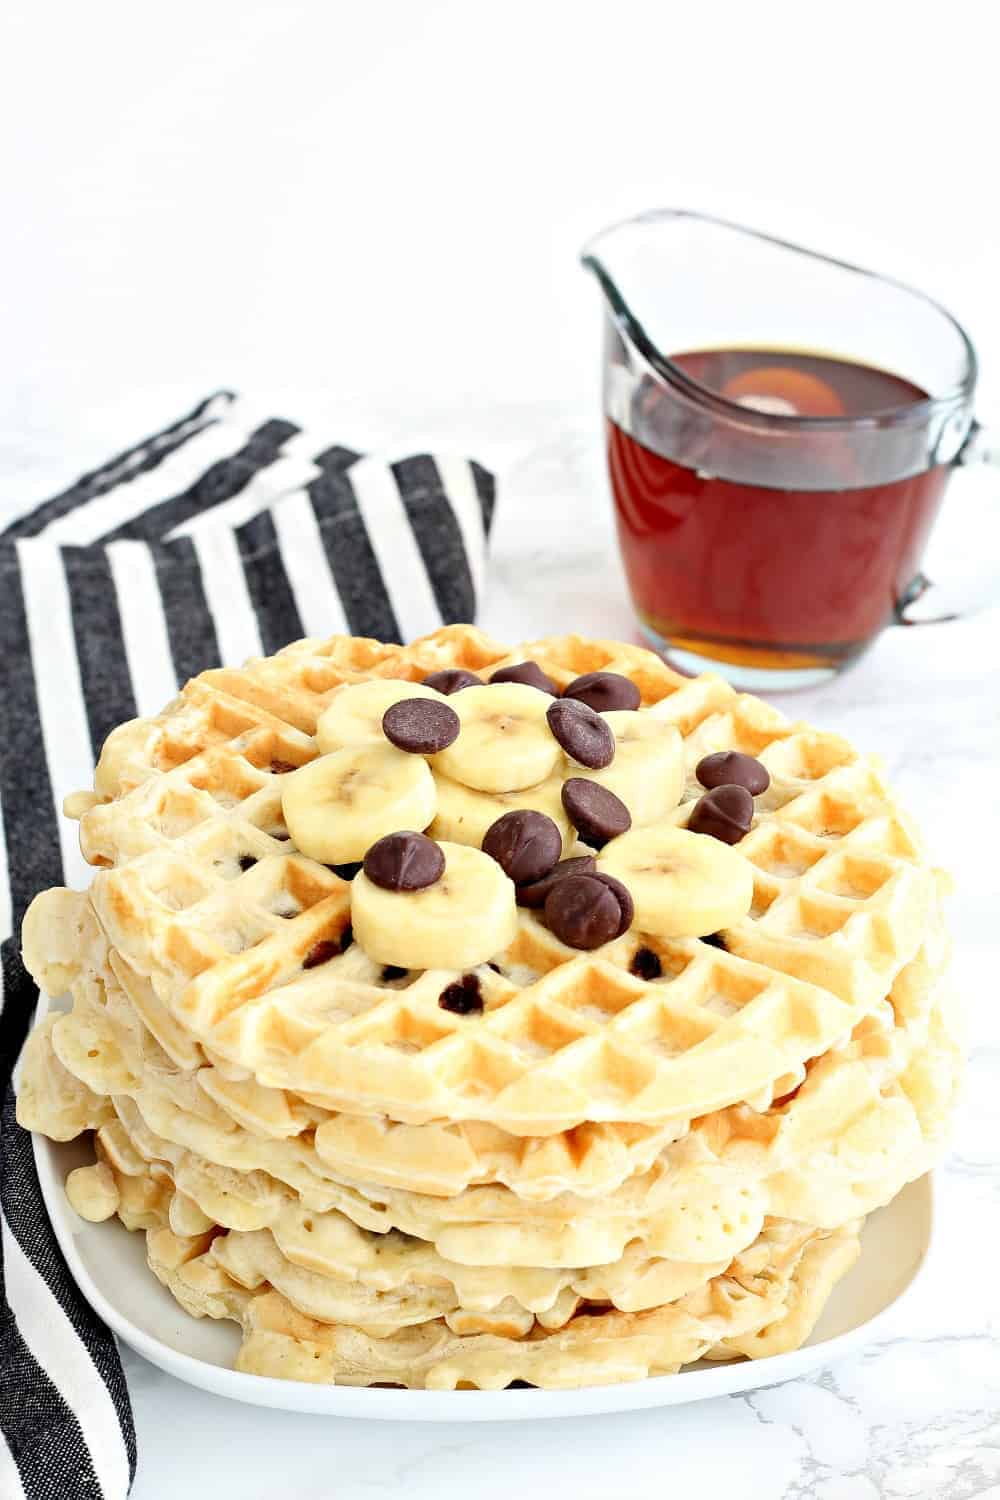 Chocolate chip waffles topped with chocolate chips and bananas